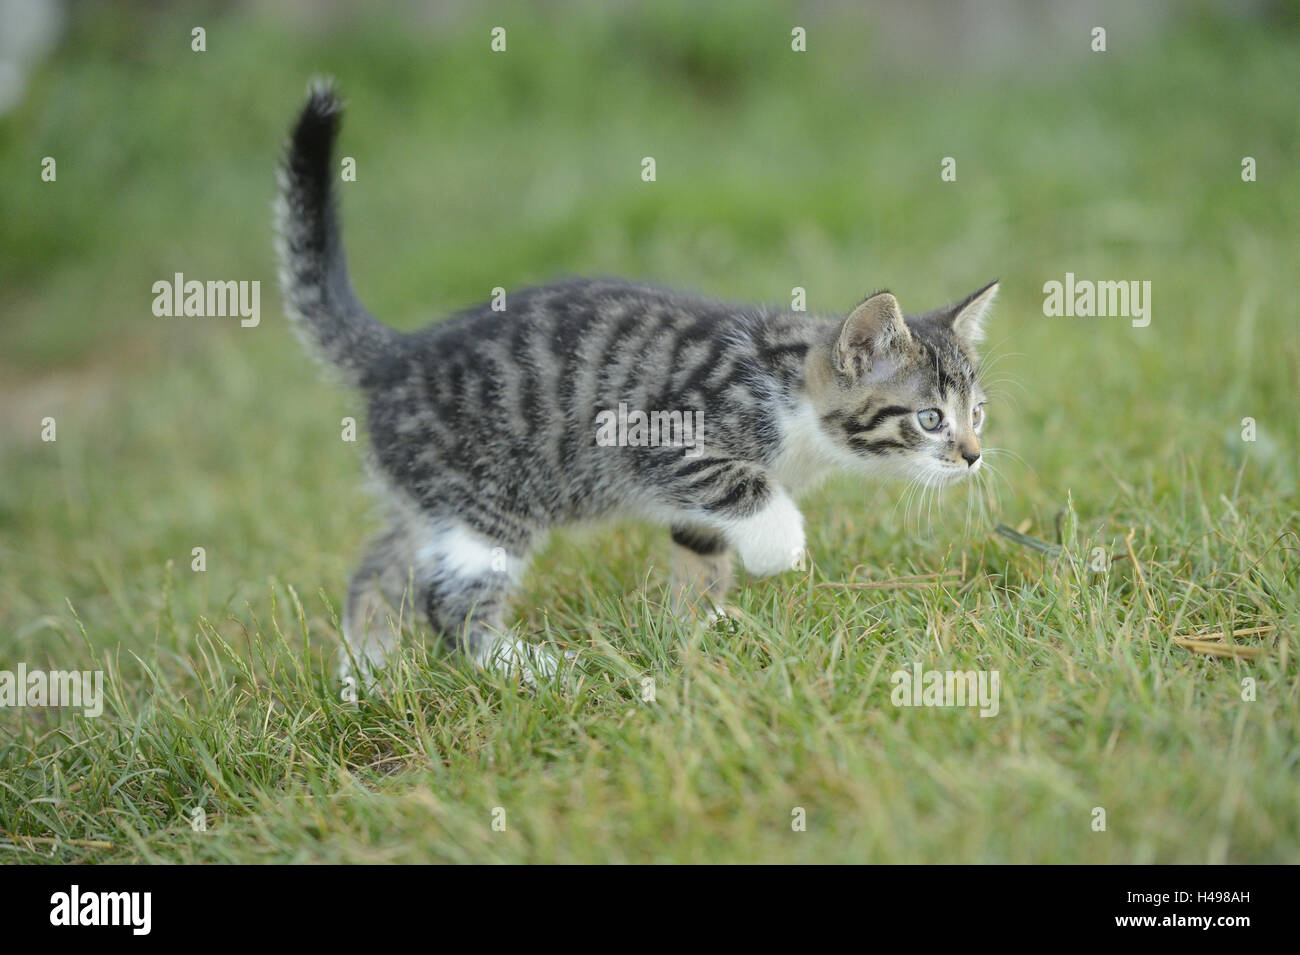 Domestic cat, Felis silvestris catus, young animal, meadow, running, side view, Stock Photo